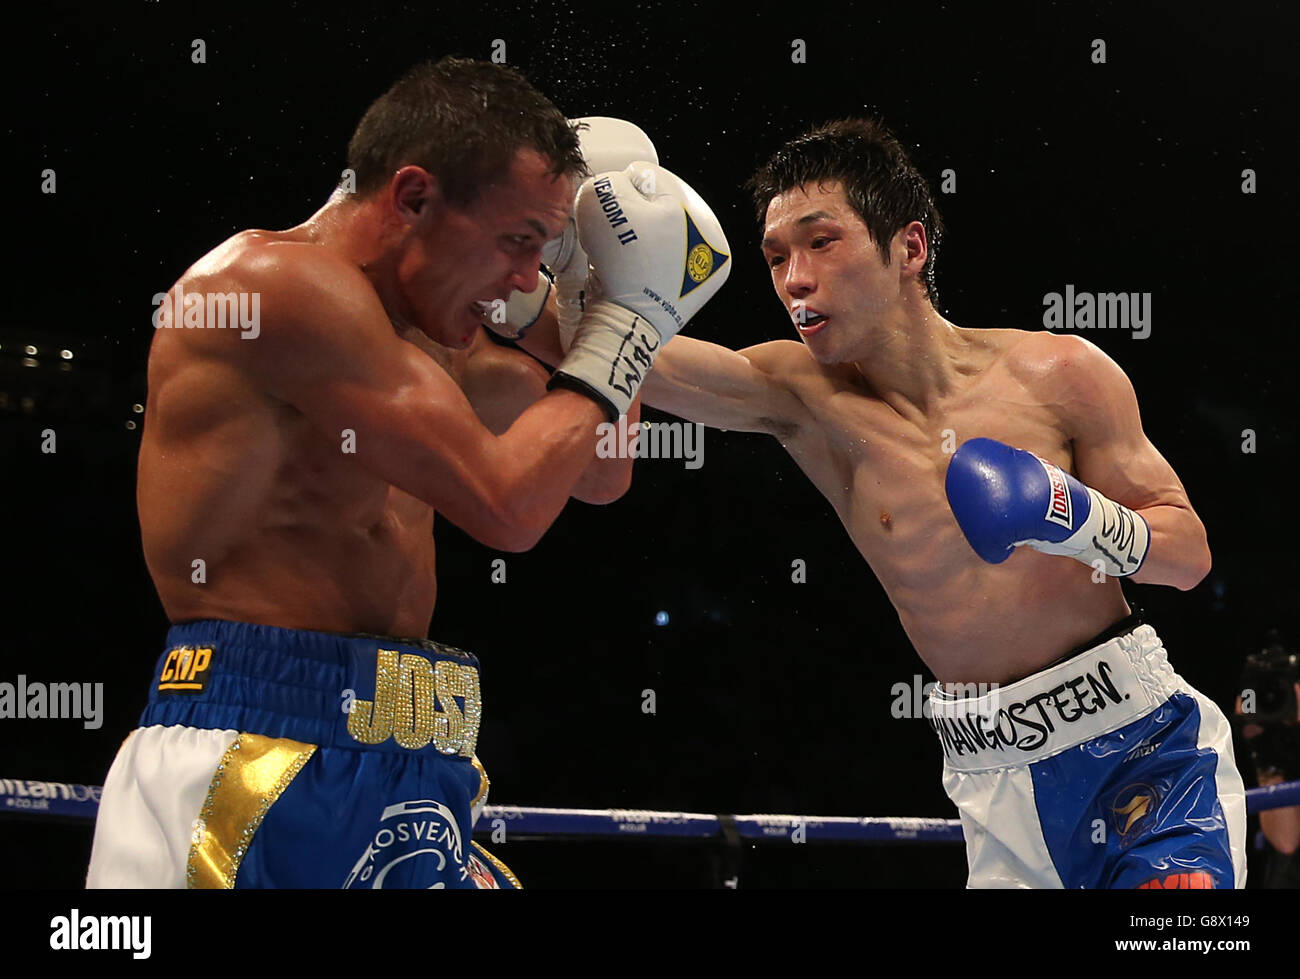 Josh Warrington (left) and Hisashi Amagasa during the WBC International Featherweight Championship bout at the First Direct Arena, Leeds. Stock Photo